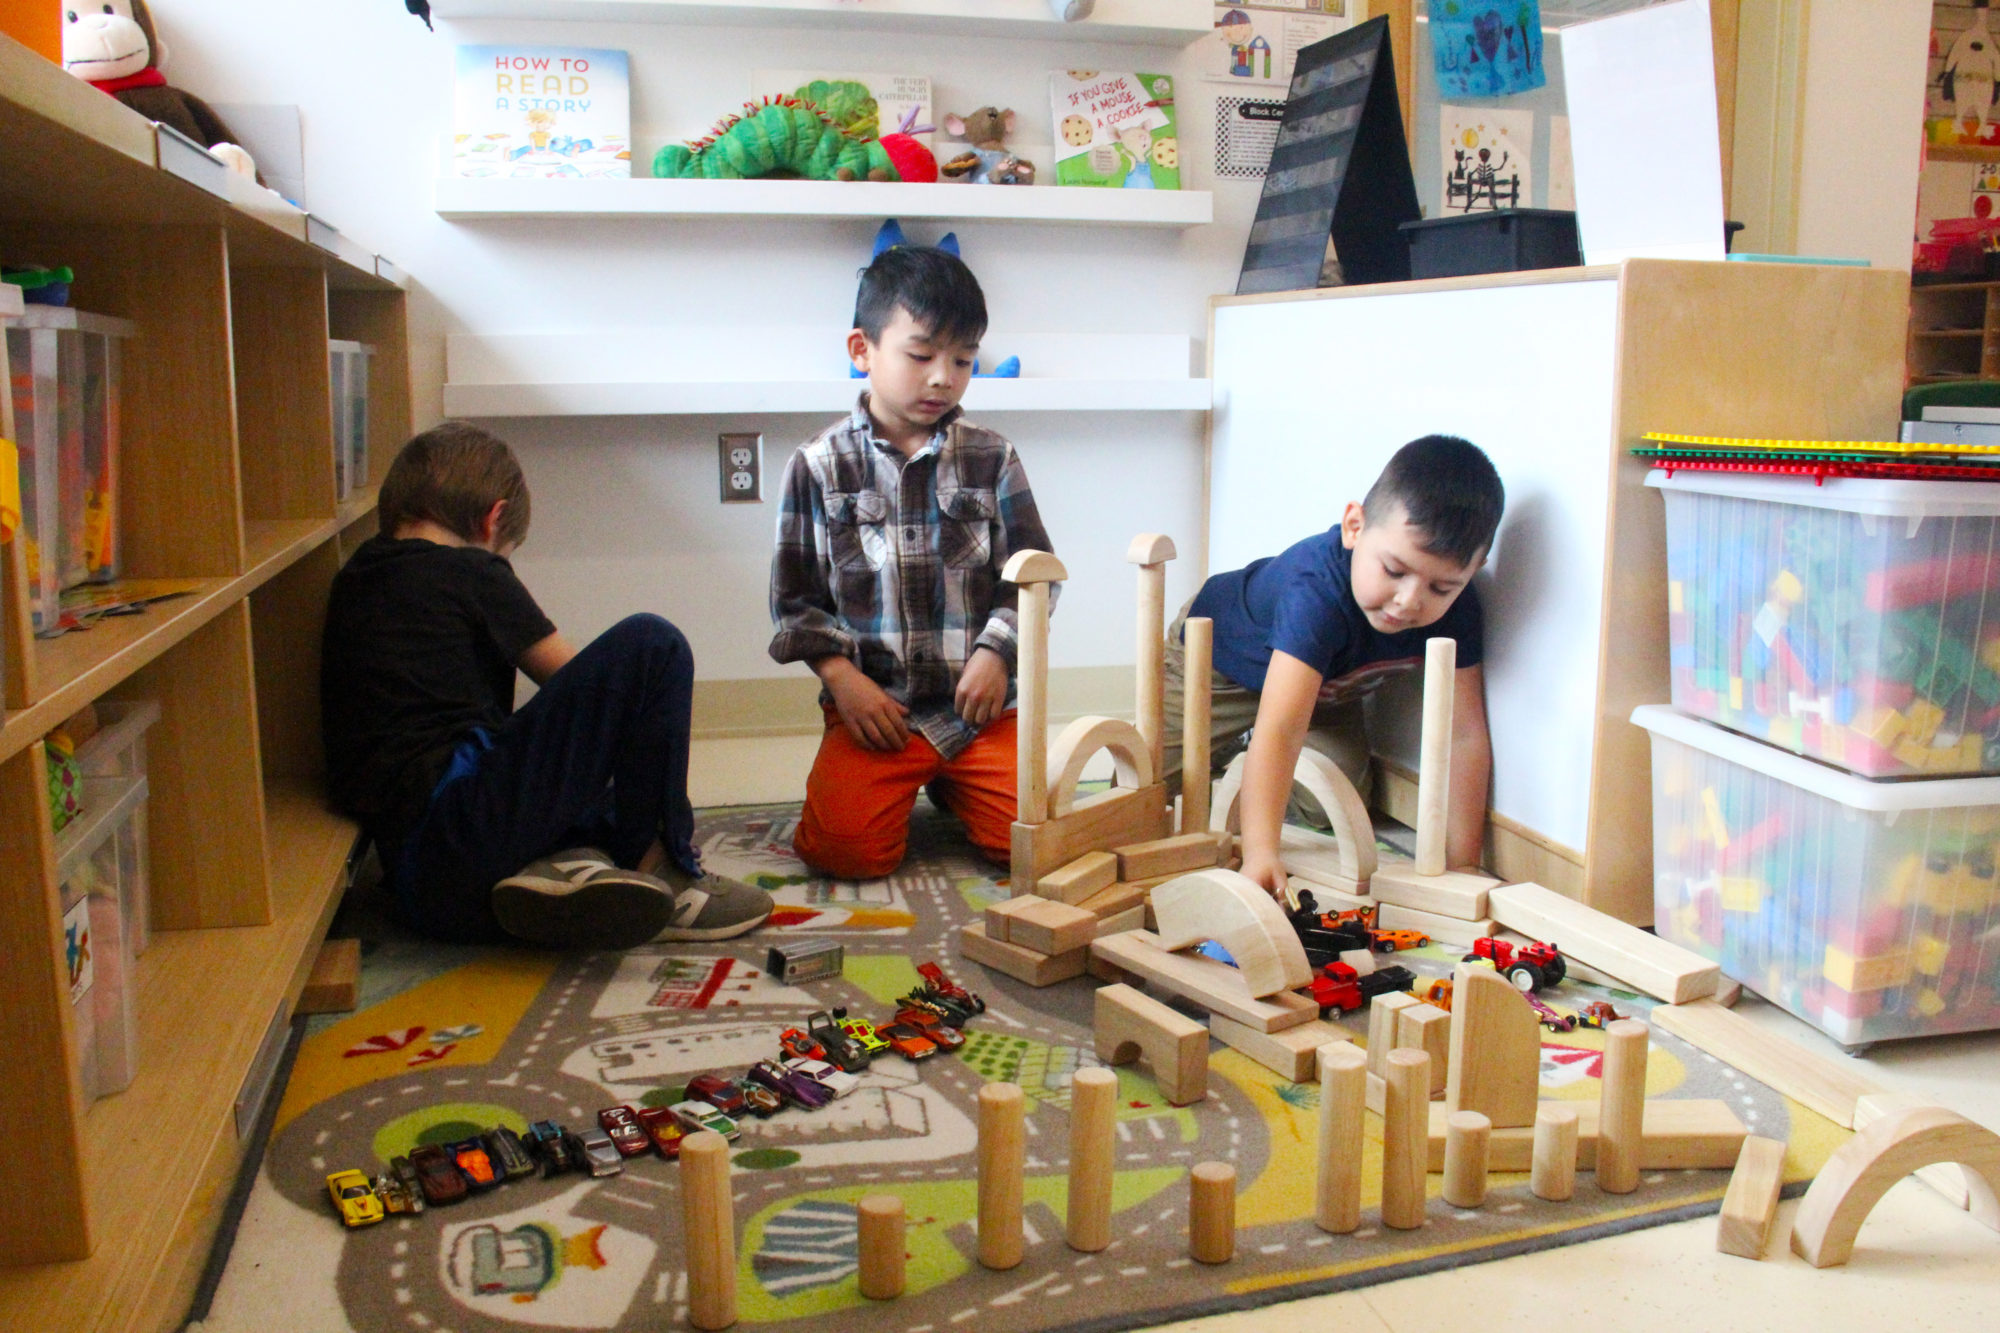 Students enjoy play, an important facet of their day, in Sara Stevens’ kindergarten class. Students have at least 40 minutes a day to play during what’s called “Play to Learn” time. Photo: Jackie Mader/The Hechinger Report